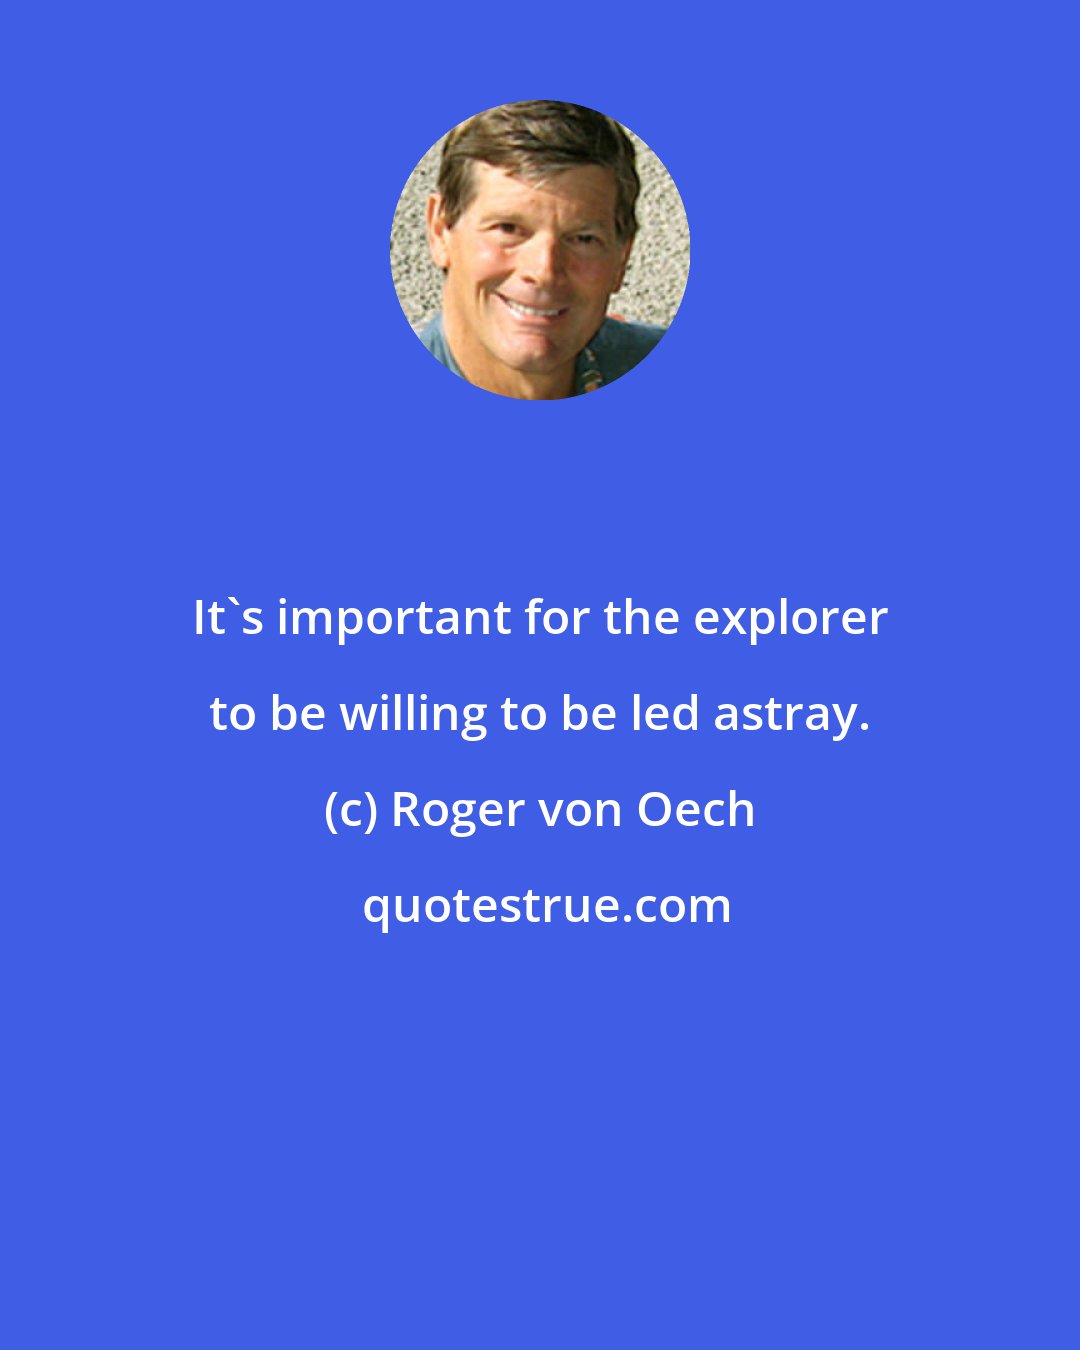 Roger von Oech: It's important for the explorer to be willing to be led astray.